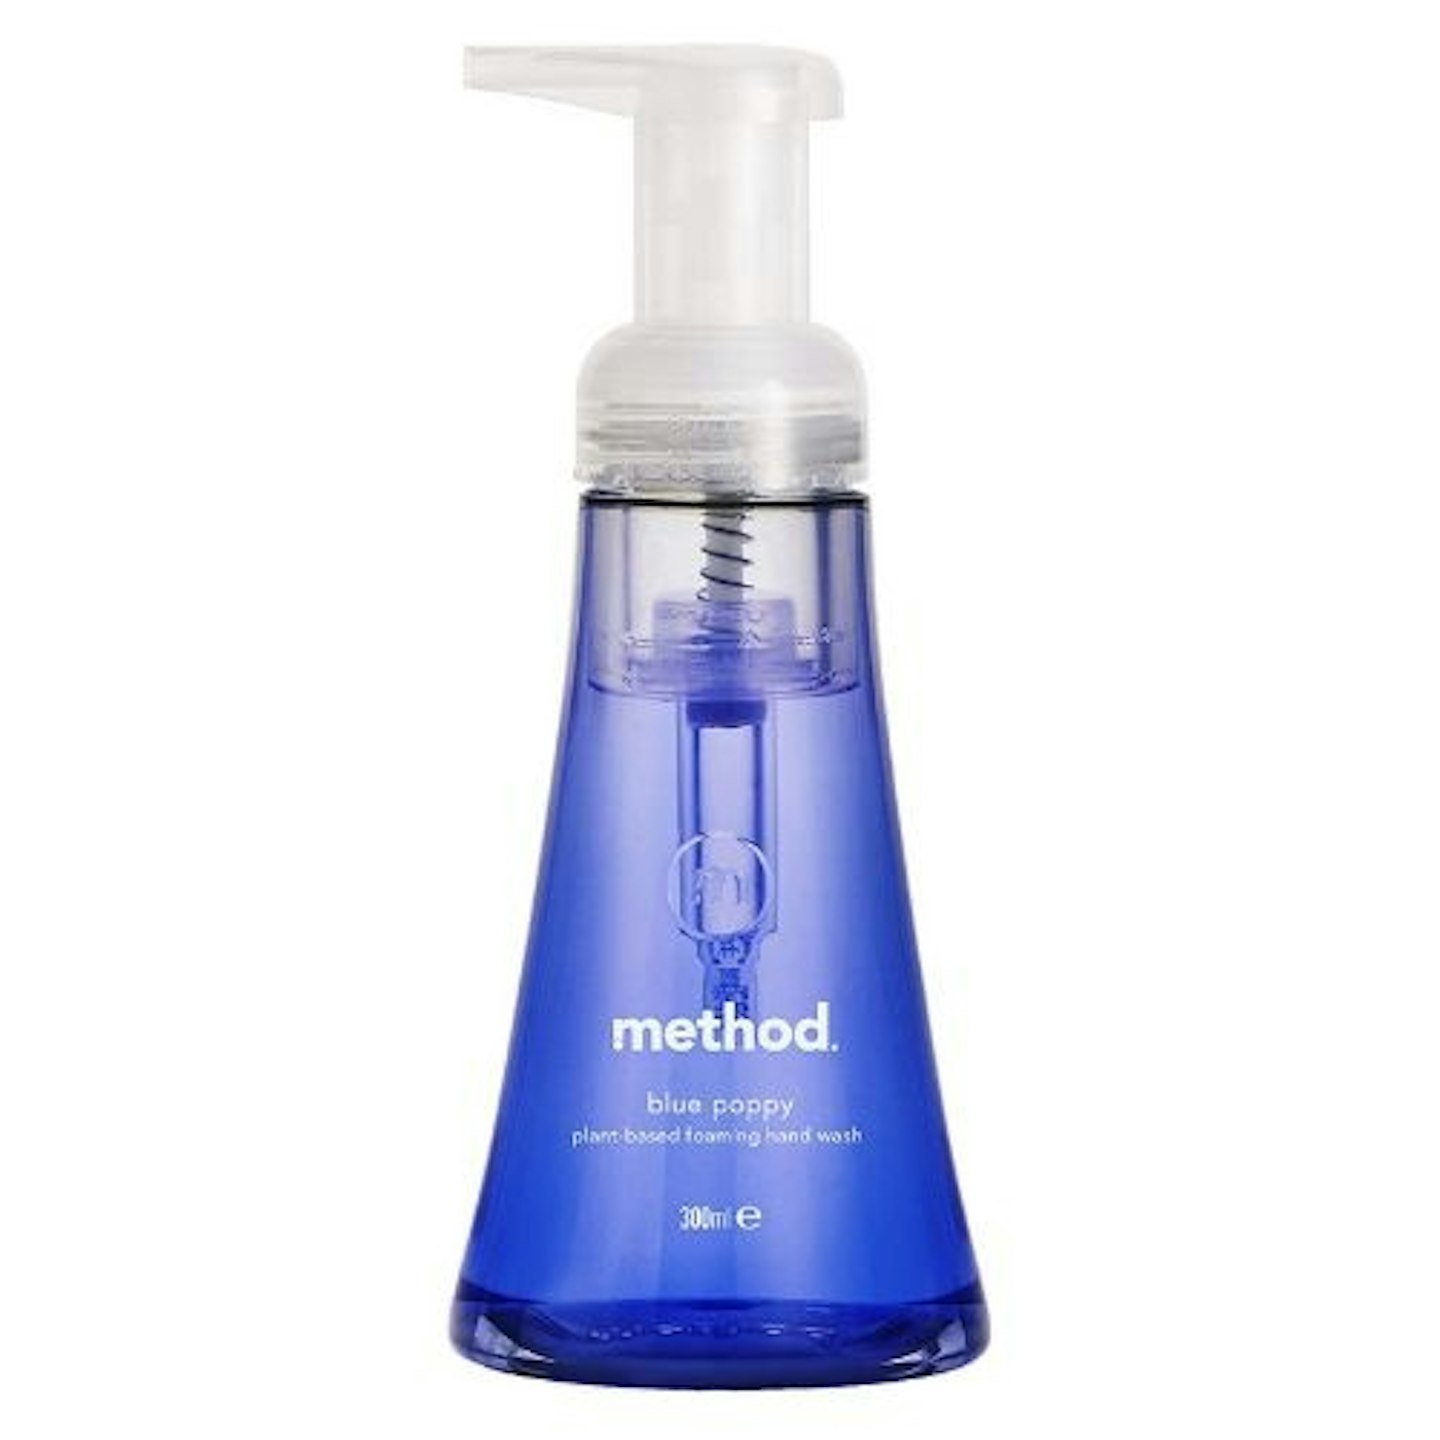 Method Blue Poppy Naturally Derived Foaming Hand Wash